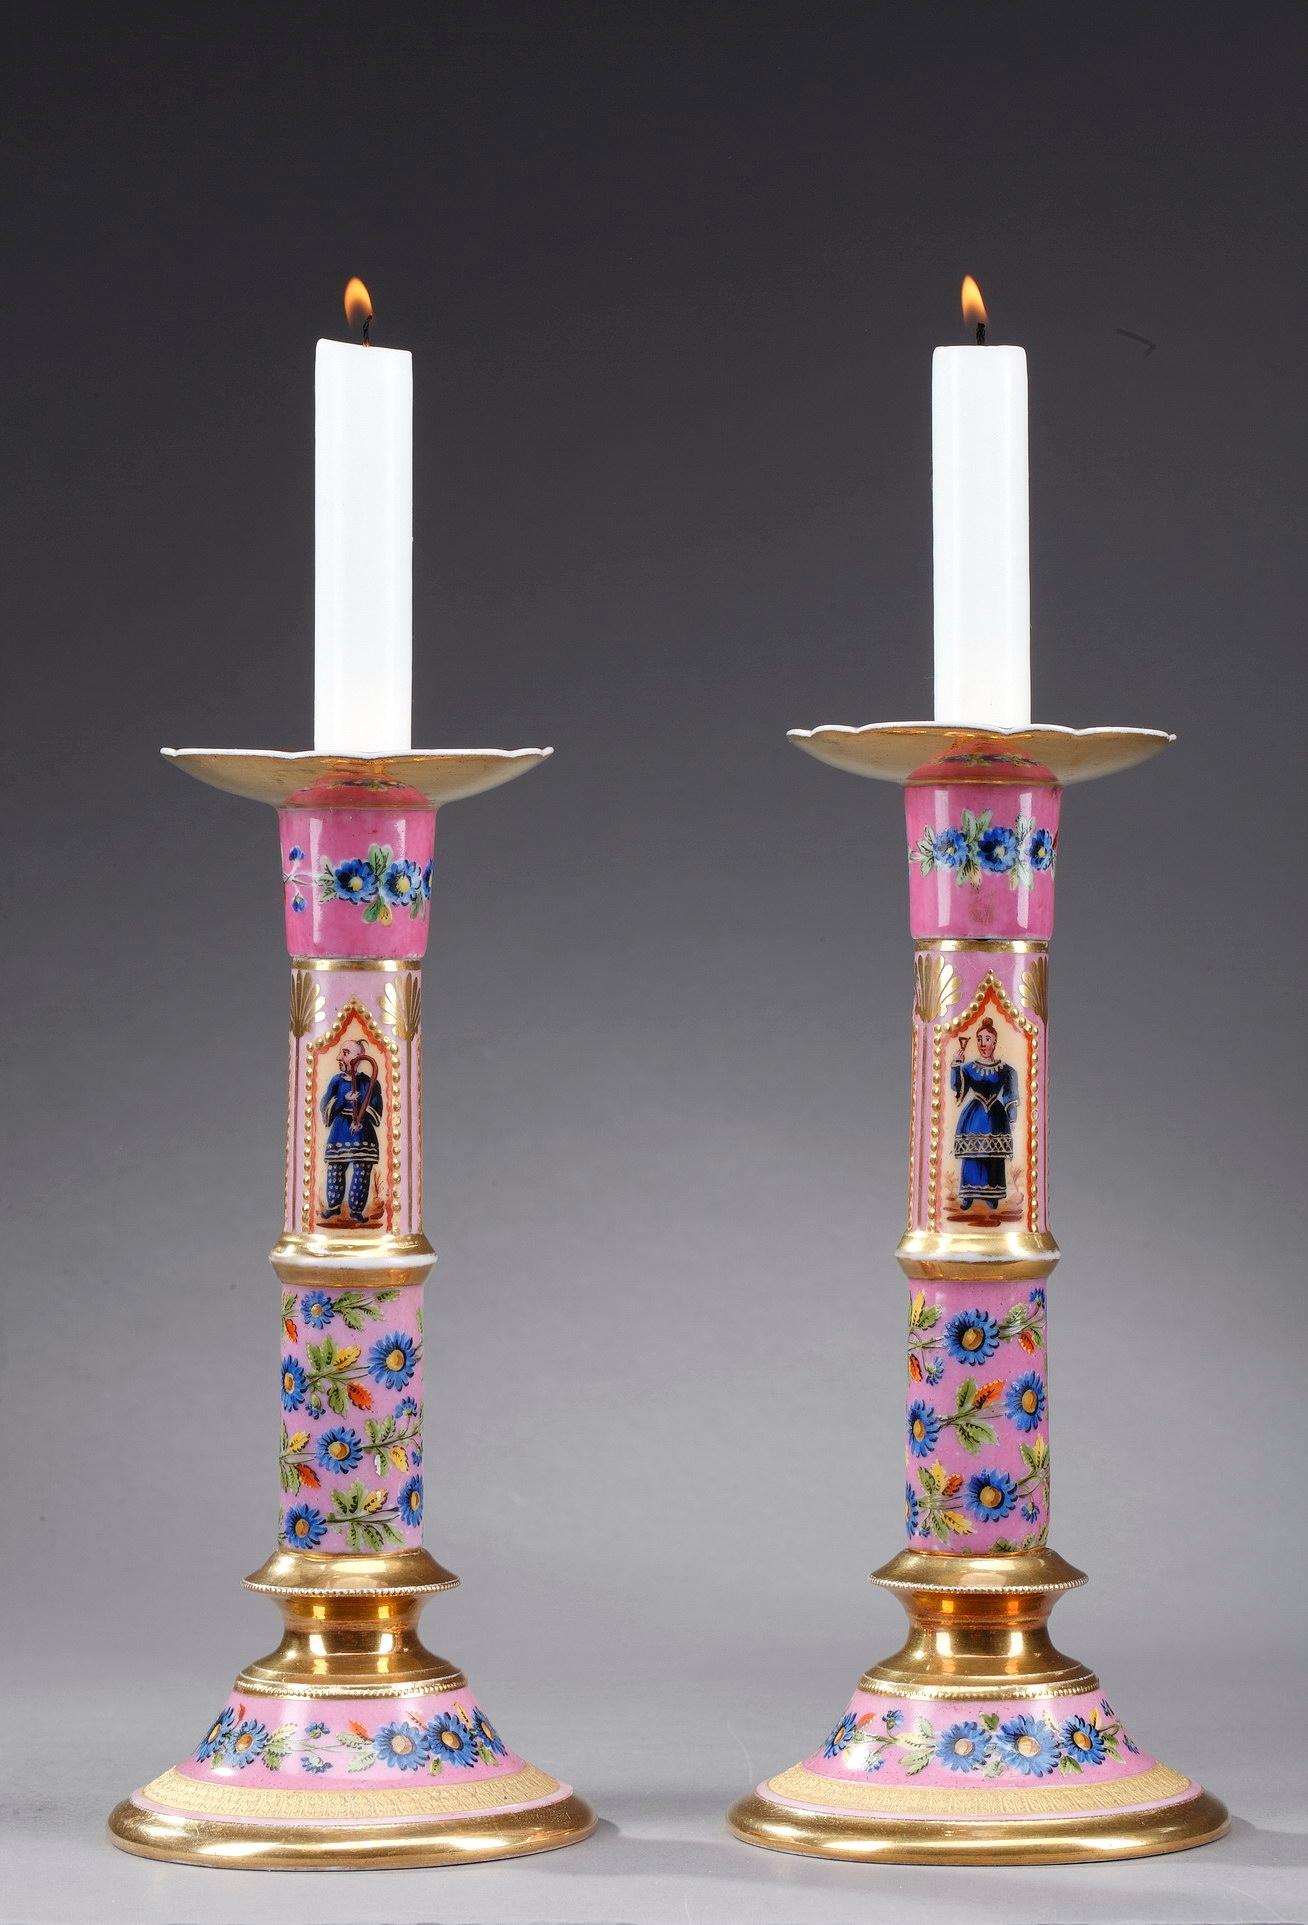 This enchanting pair of Restauration candlesticks is crafted of Paris hard-paste porcelain. Both lights exhibit multicolored decoration including oriental characters and a multitude of flowers on pink background. Each torch rests on a round foot